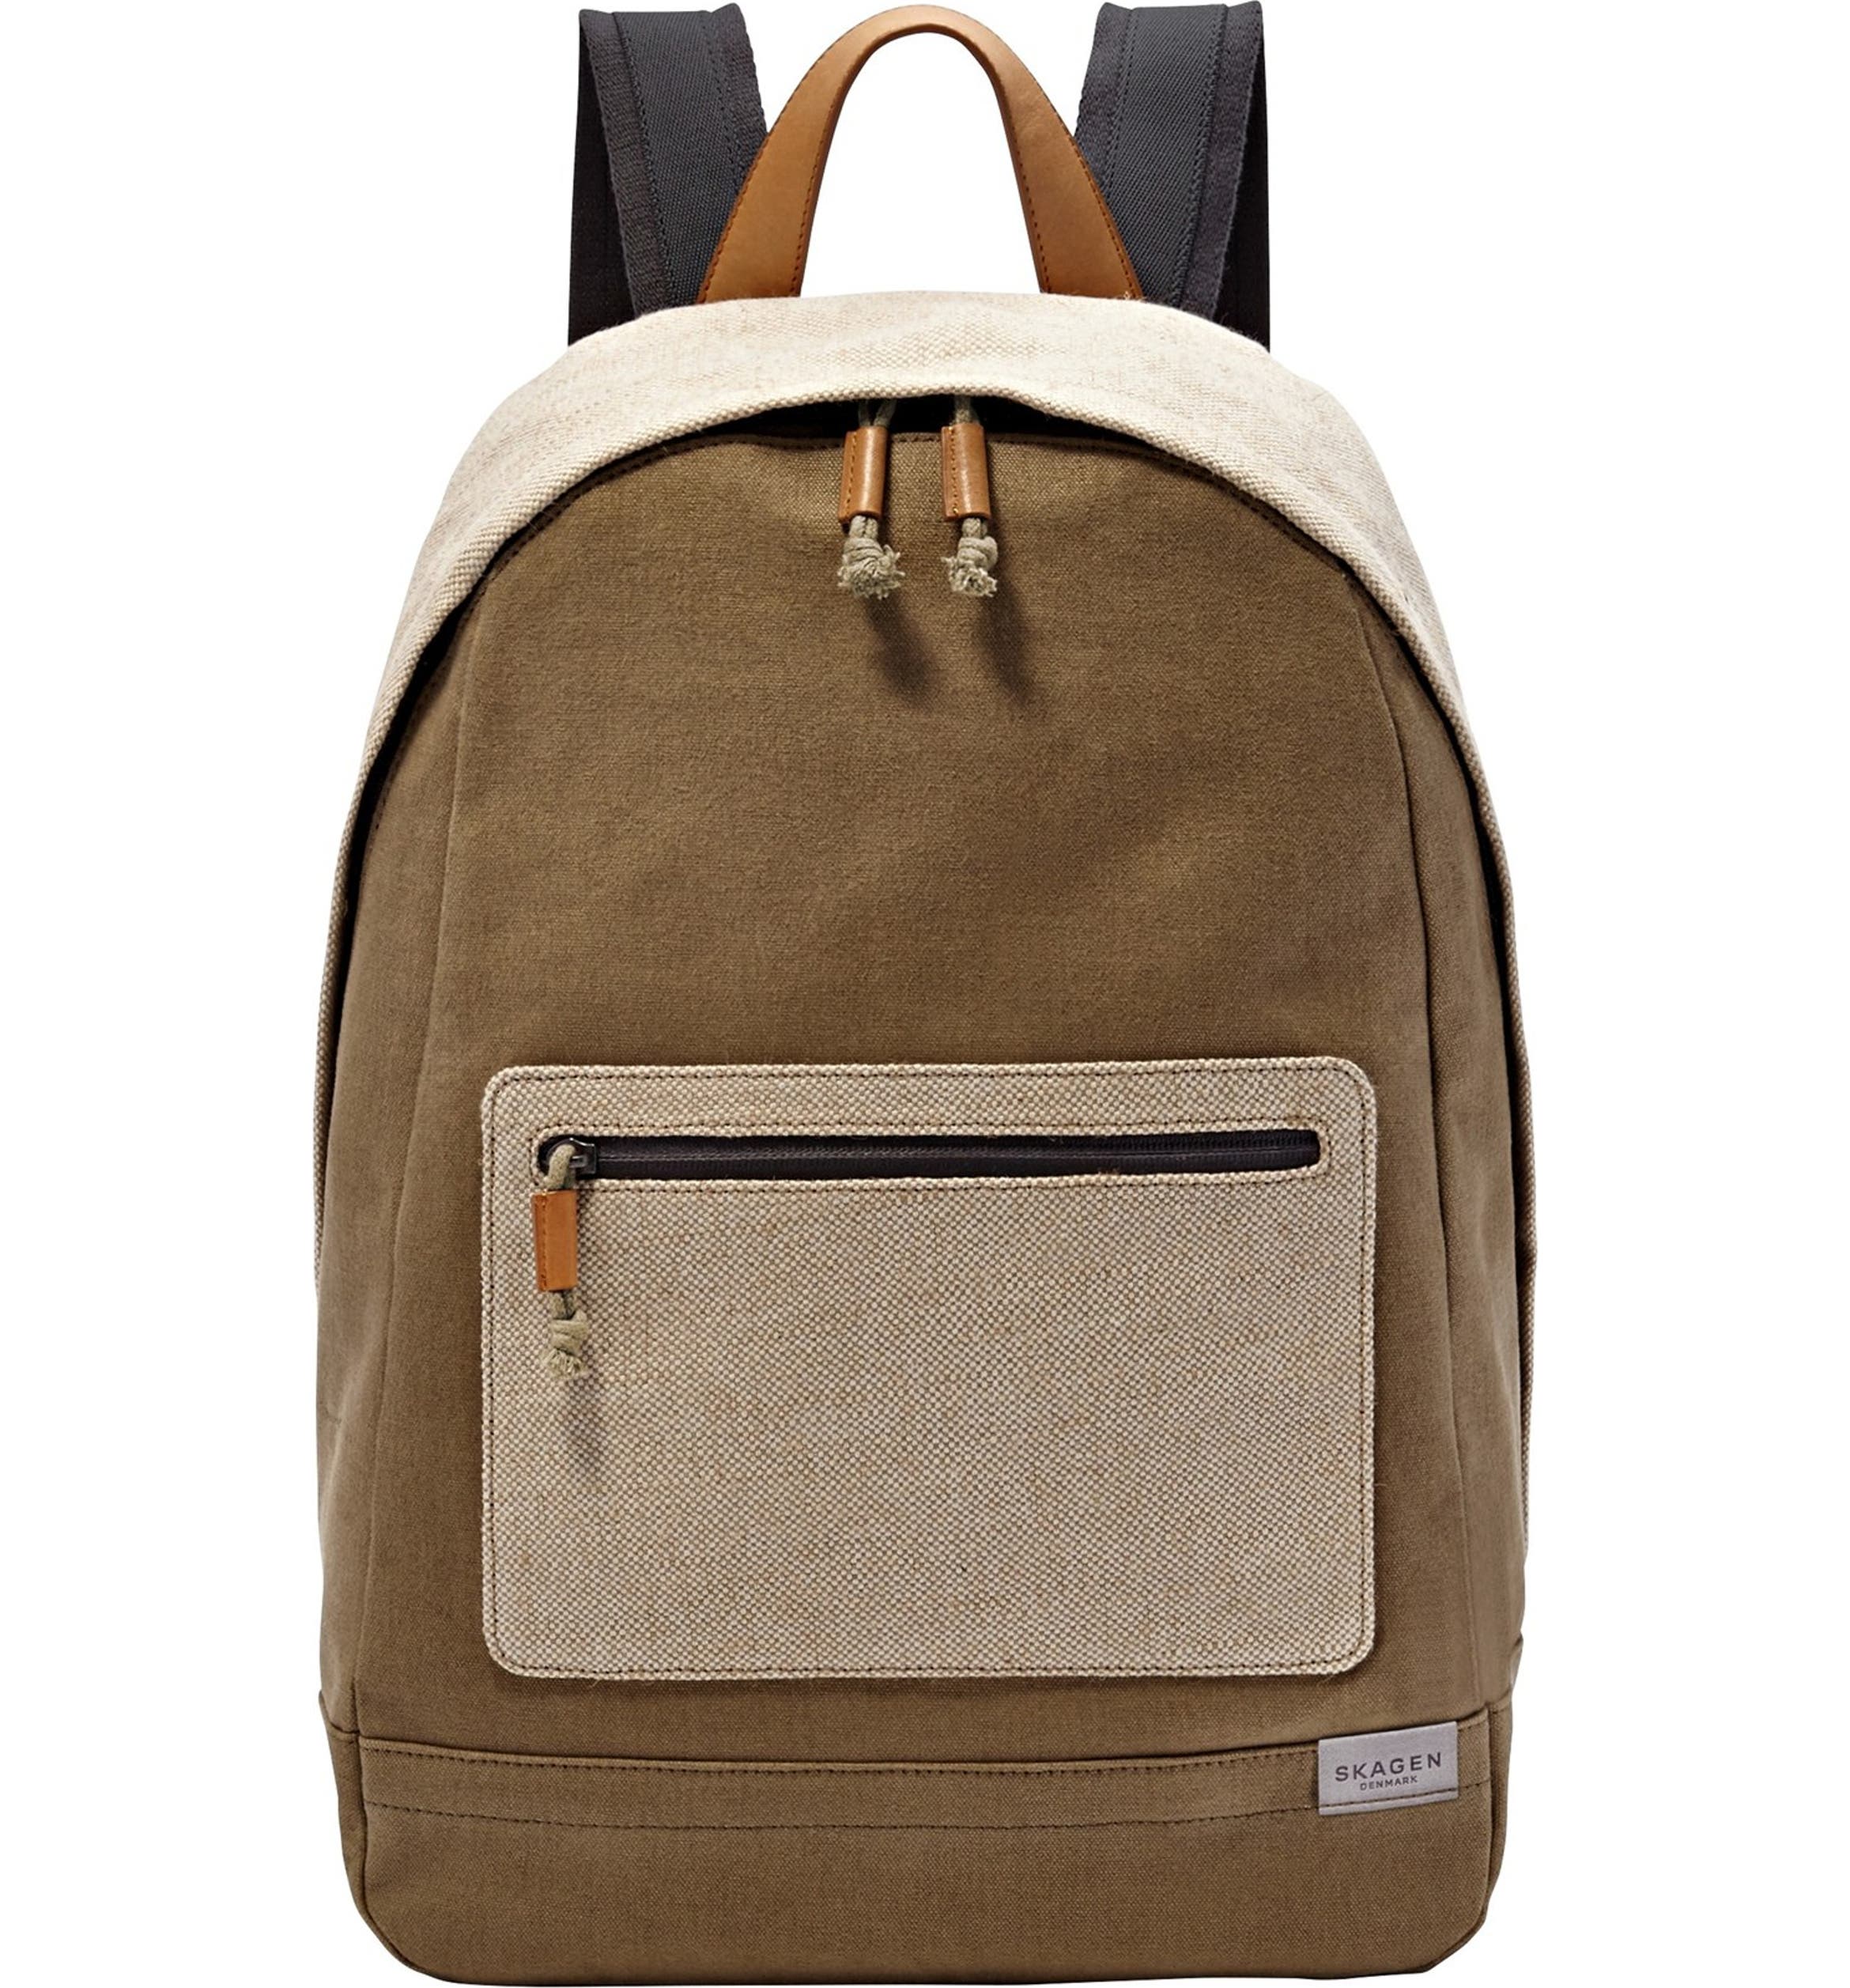 Skagen 'Kroyer' Neutral Colorblock Waxed Canvas Twill Backpack | Nordstrom